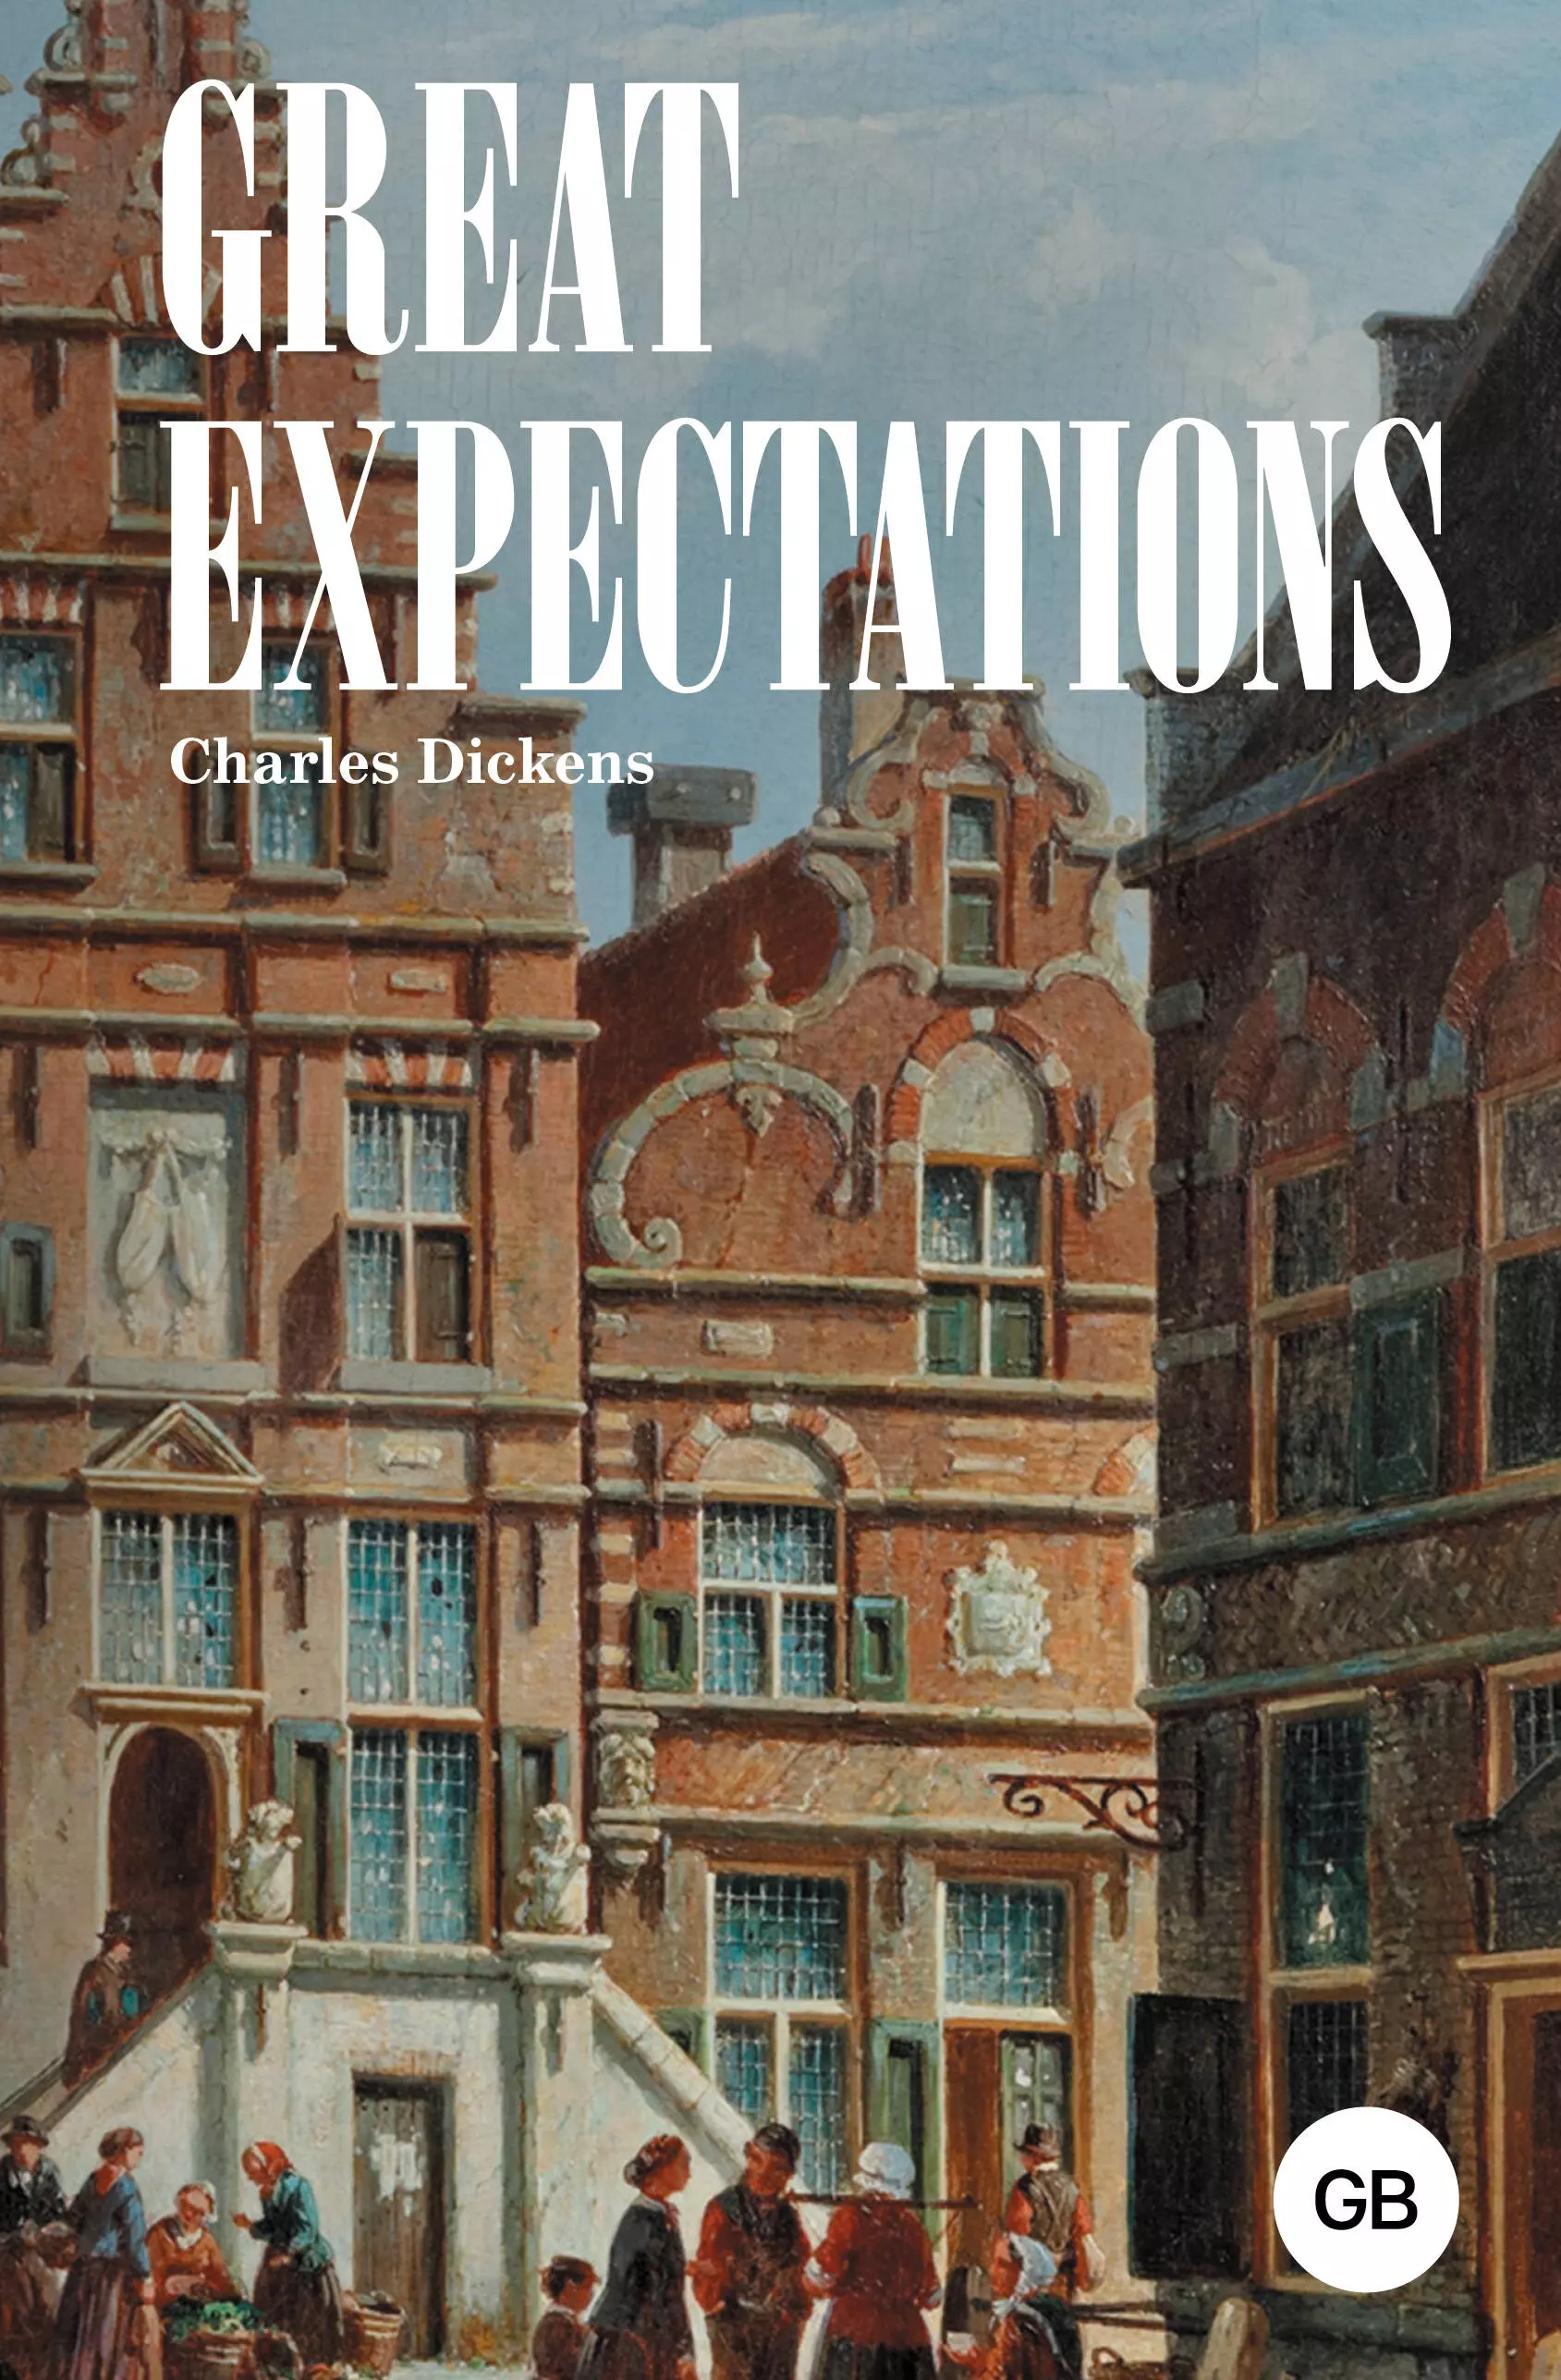 Great Expectations noel jack great expectations